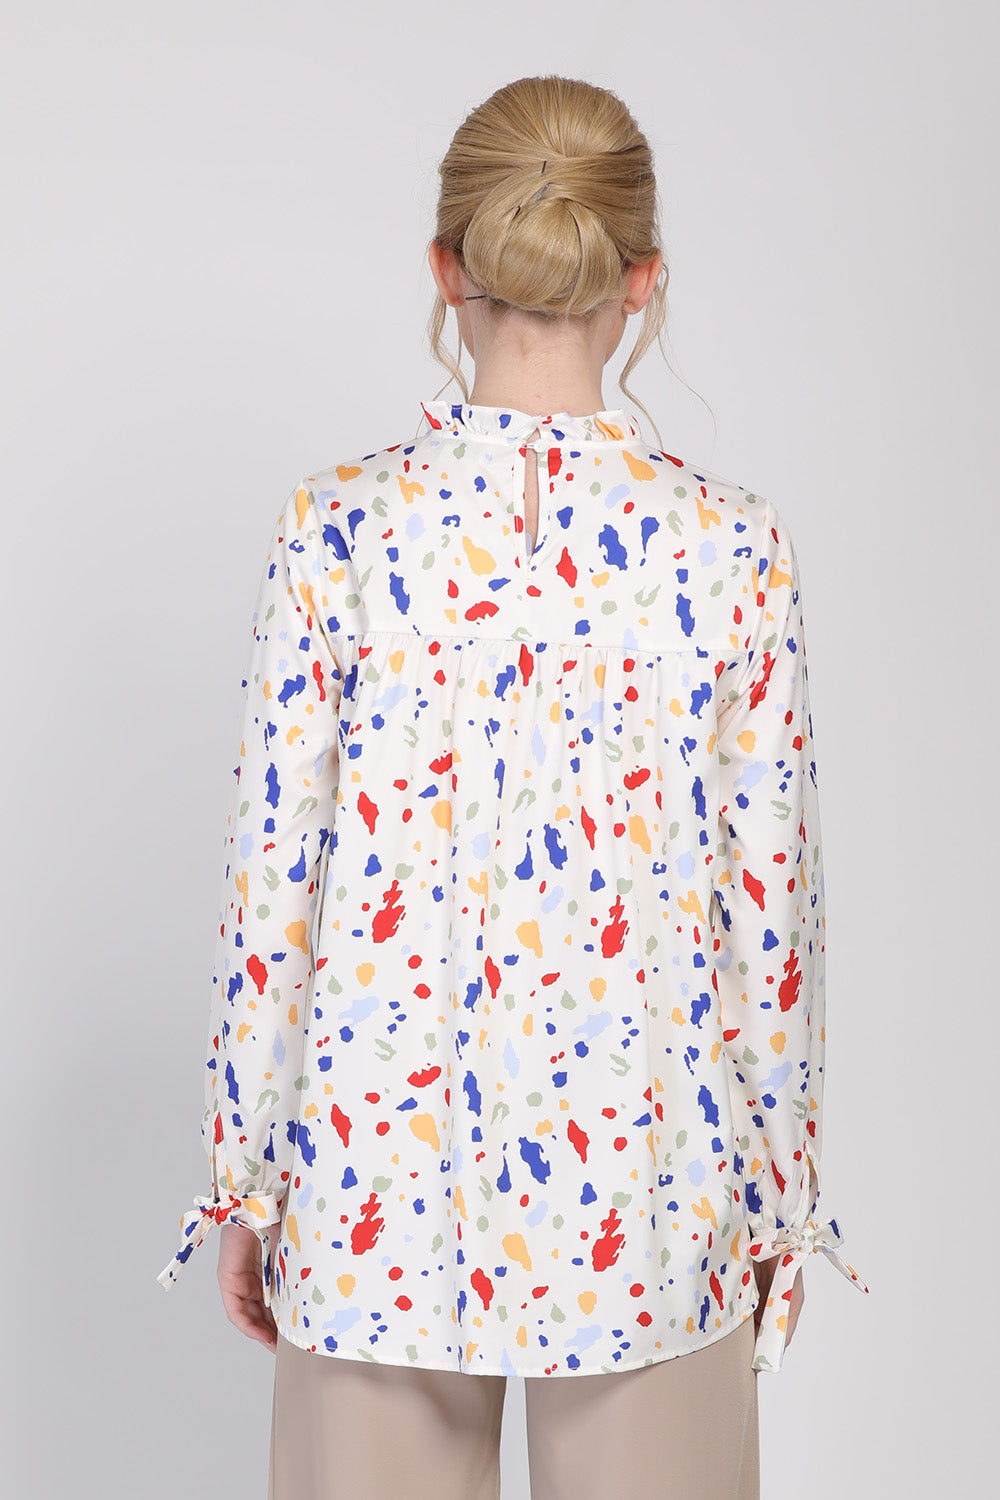 The Ceria Blouse in Brush Paints